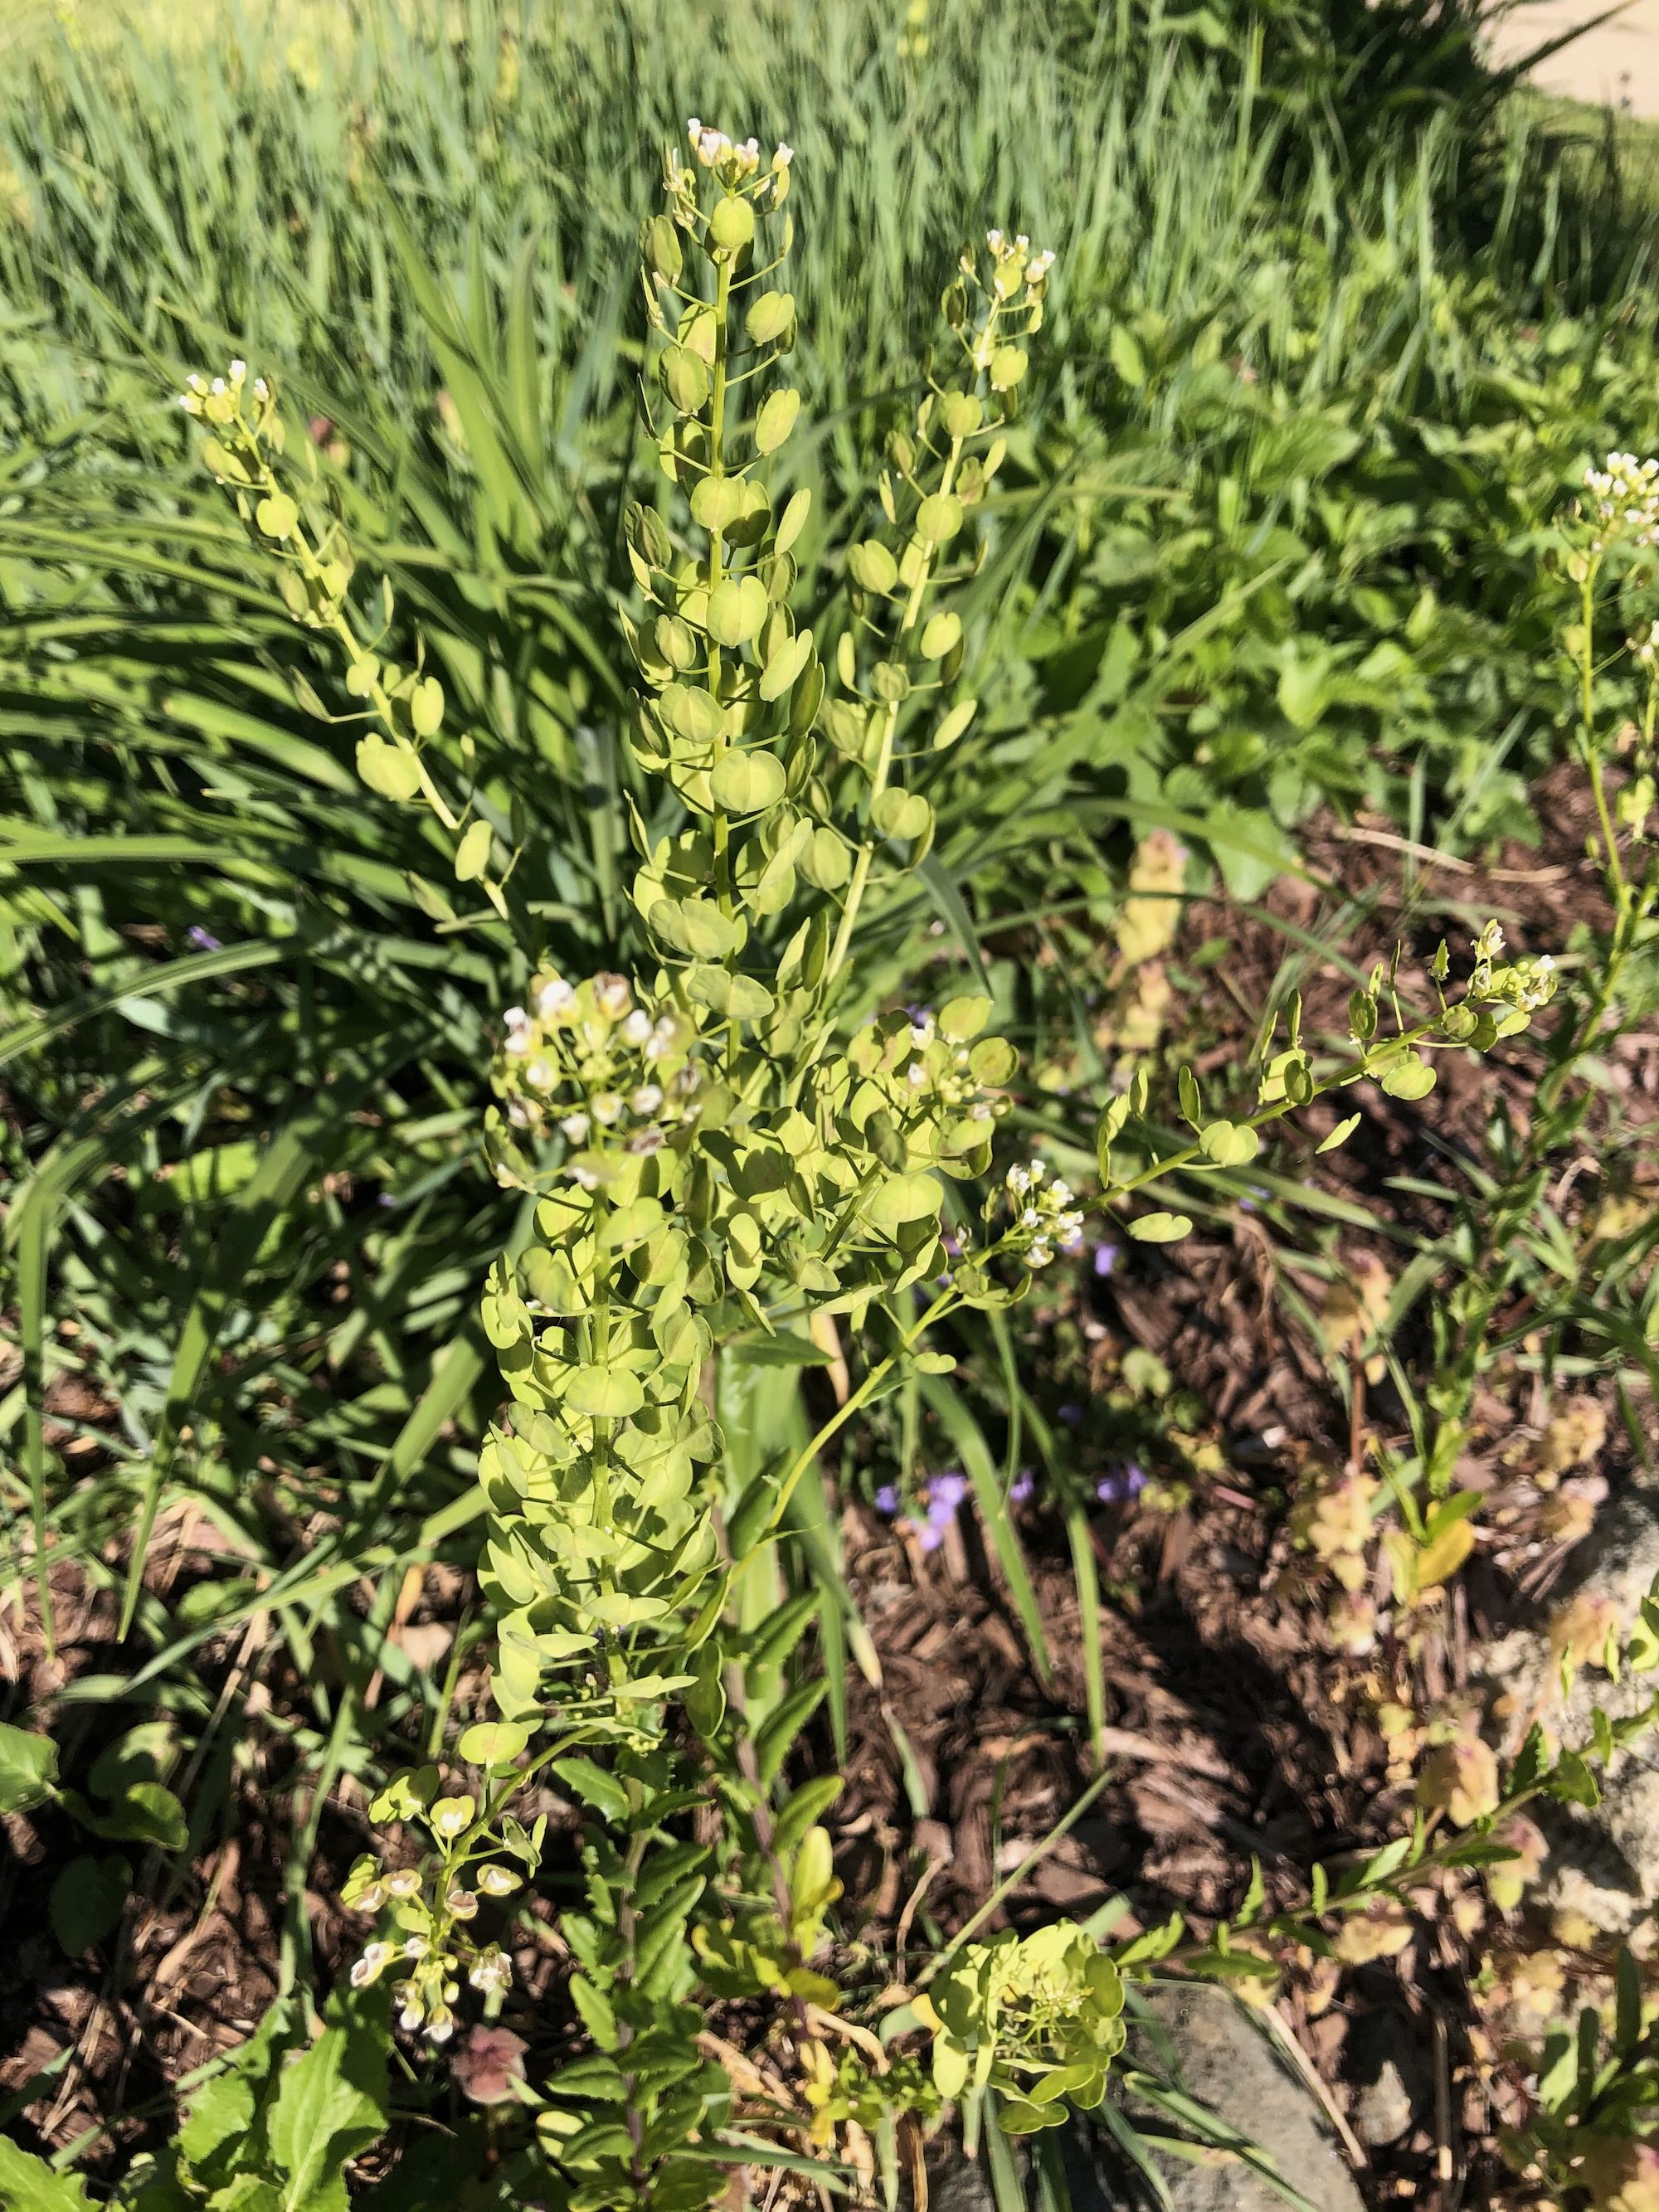 Field Pennycress near retaining pond on corner of Manitou Way and Nakoma Road in Madison, Wisconsin on May 12, 2021.